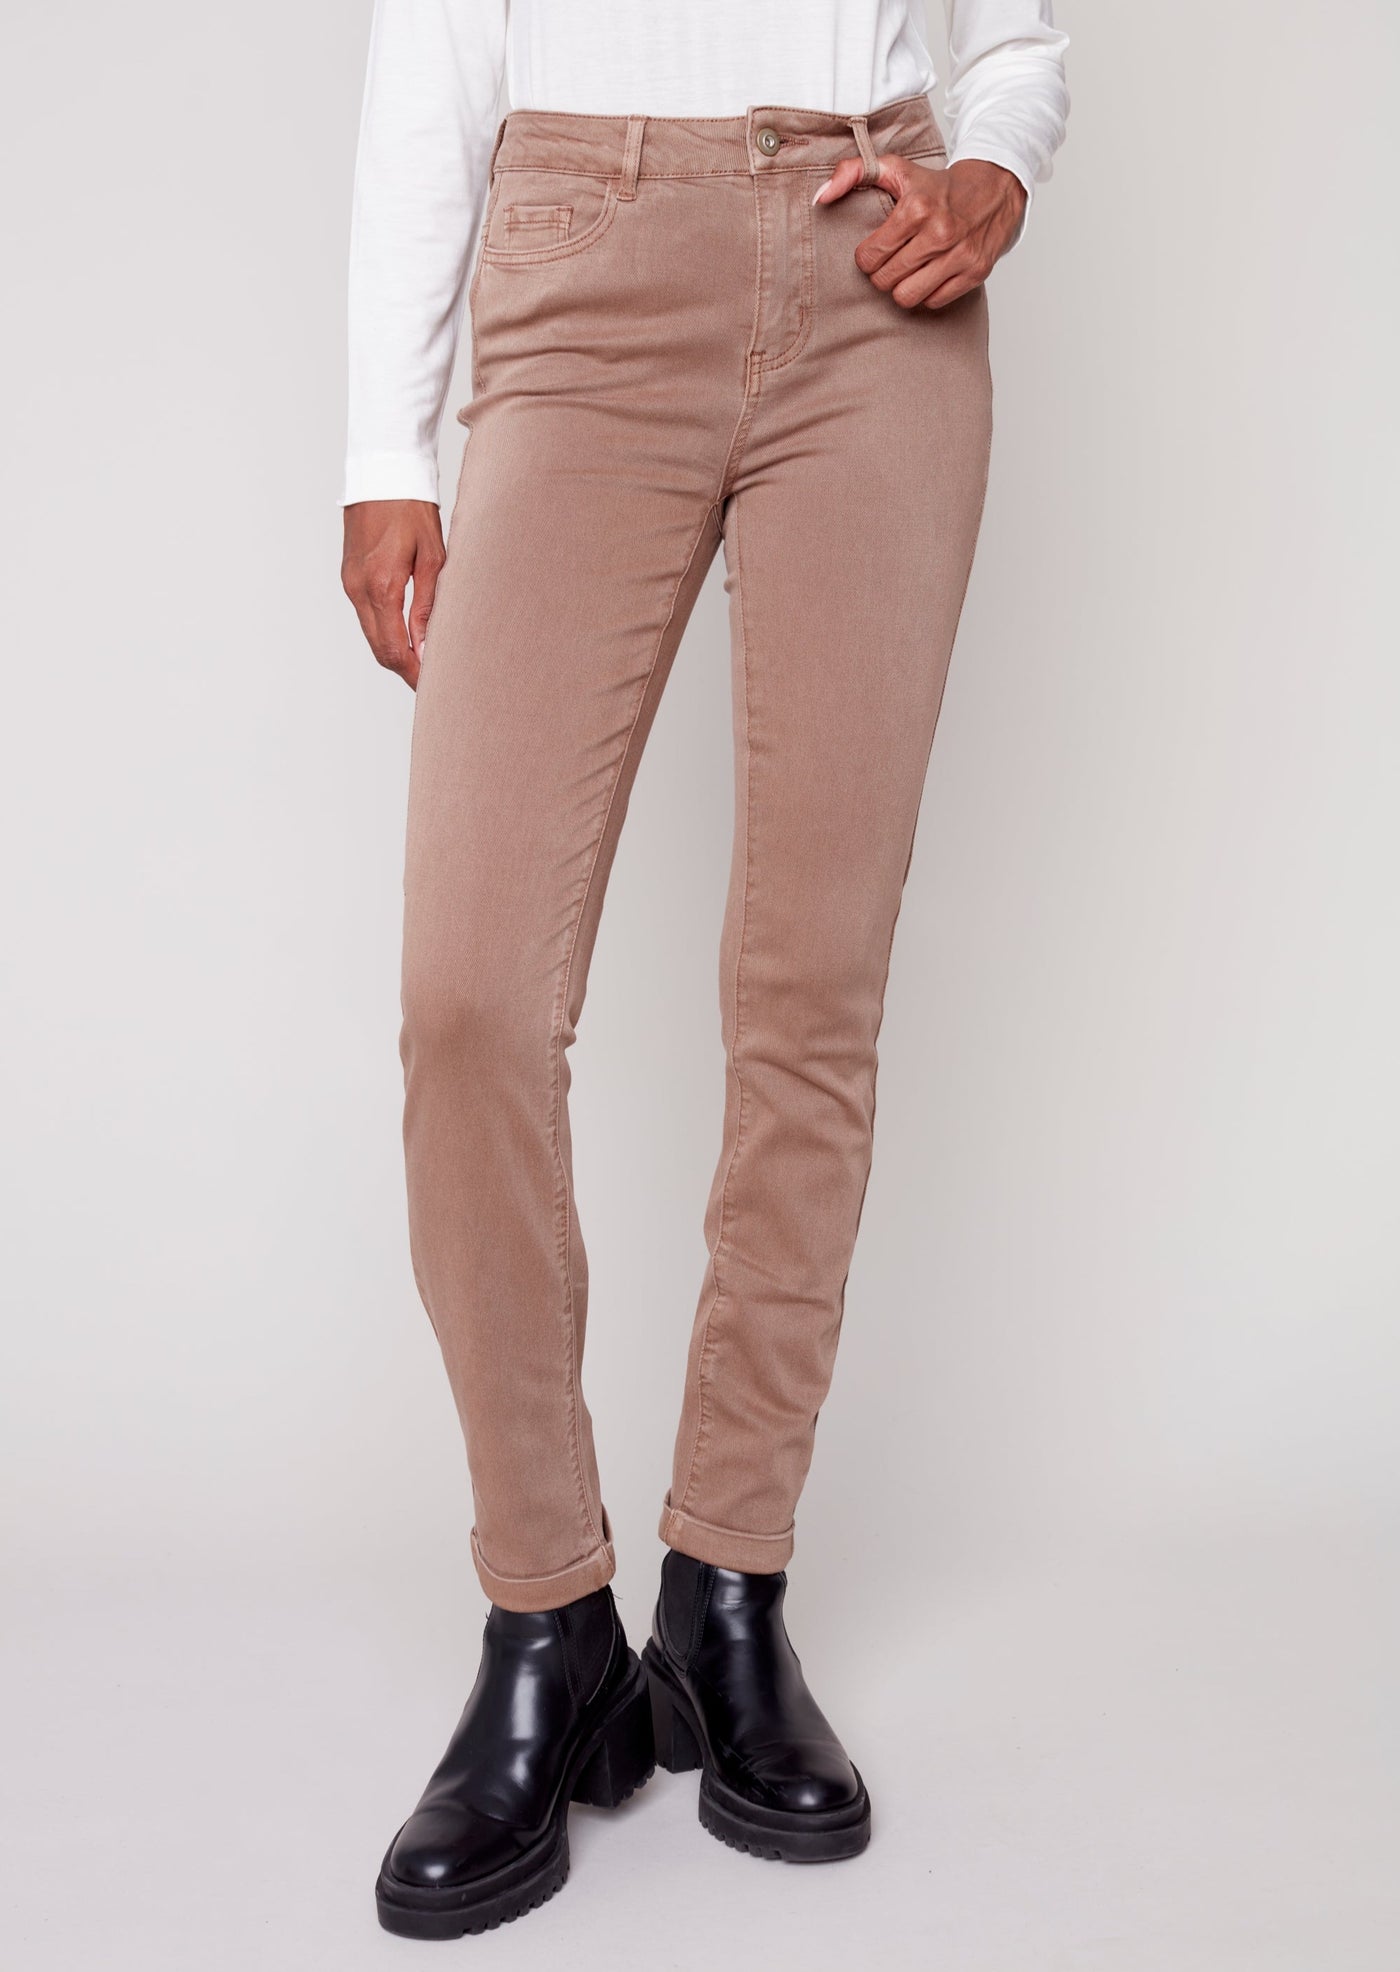 Charlie B - Colored Twill Cuff Pant